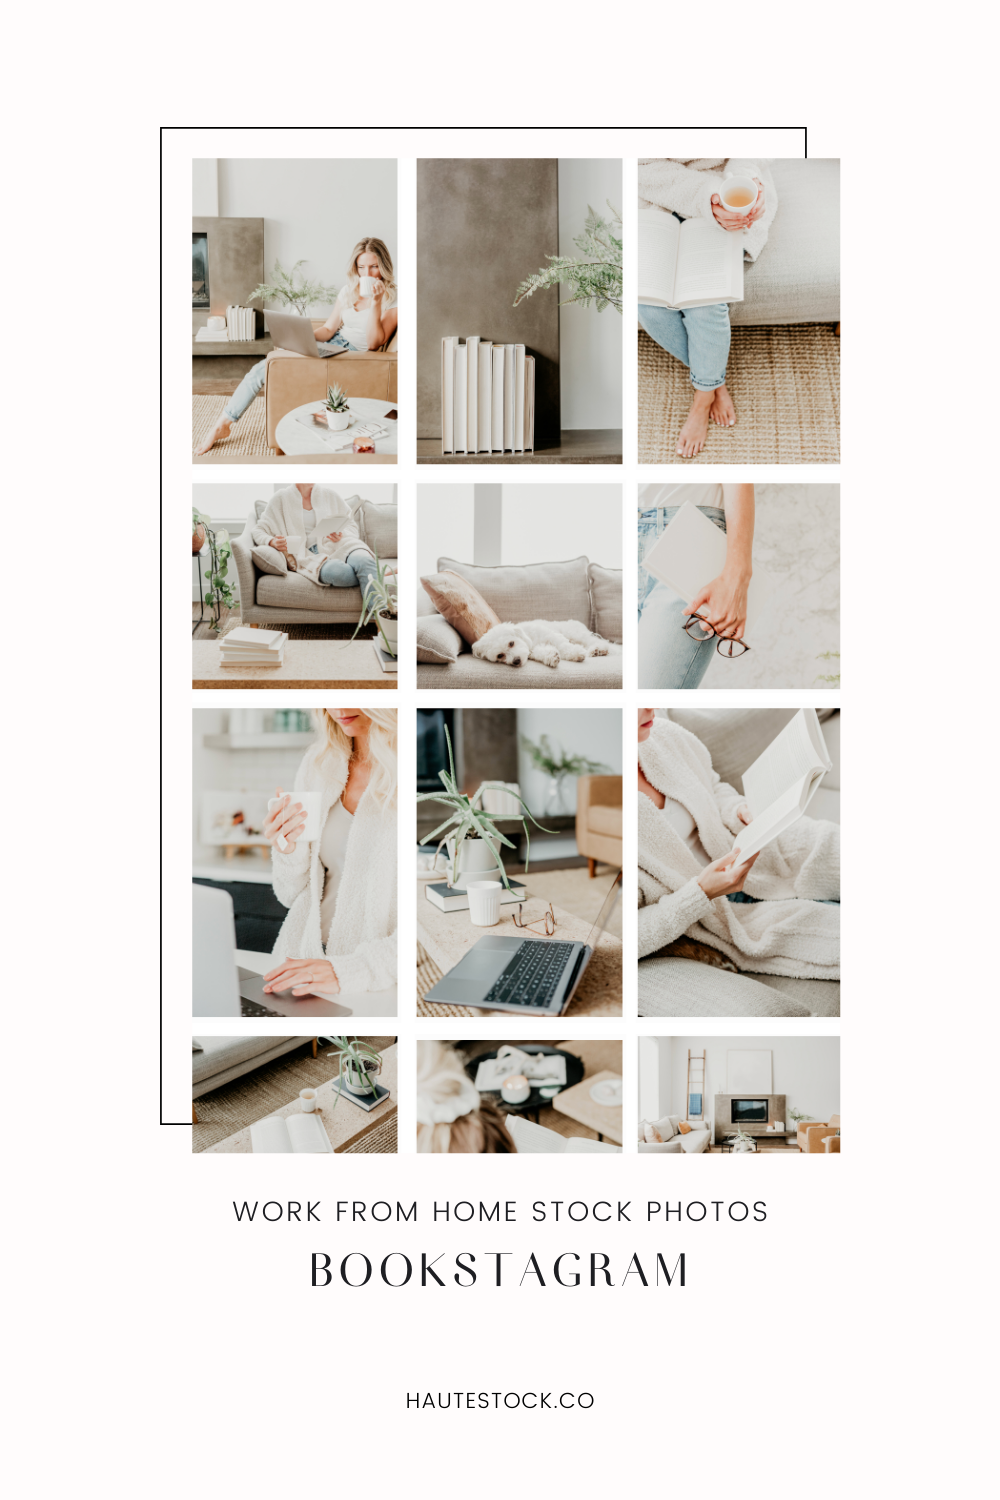 Cozy work from home stock images for women business owners